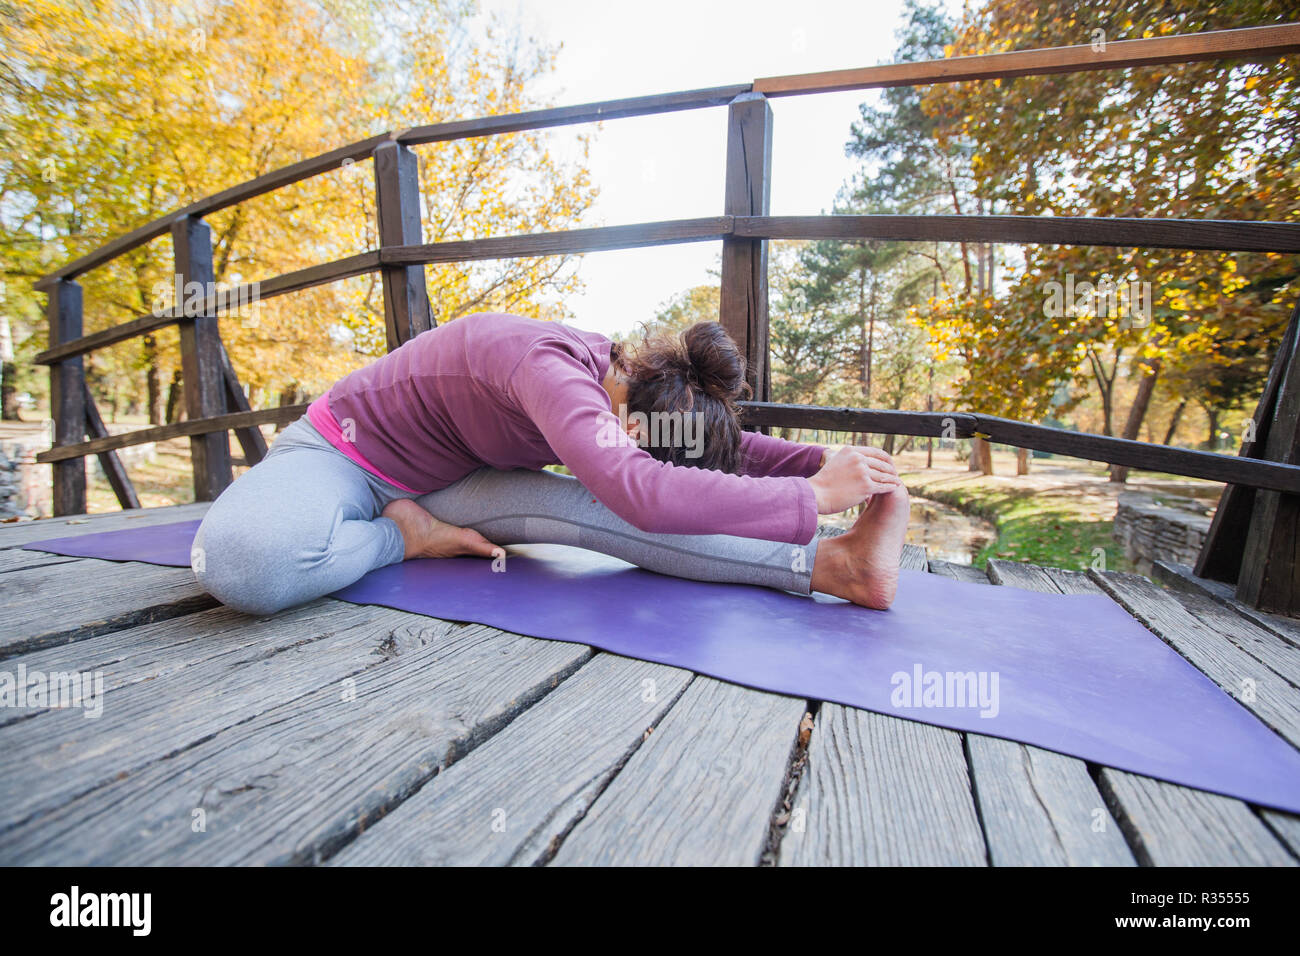 Young Sporty Woman Doing Yoga Exercise, Head To Knee Forward Bend Pose,  On Wooden Bridge At Park. Morning Autumn Day. Healthy Lifestyle. Stock Photo